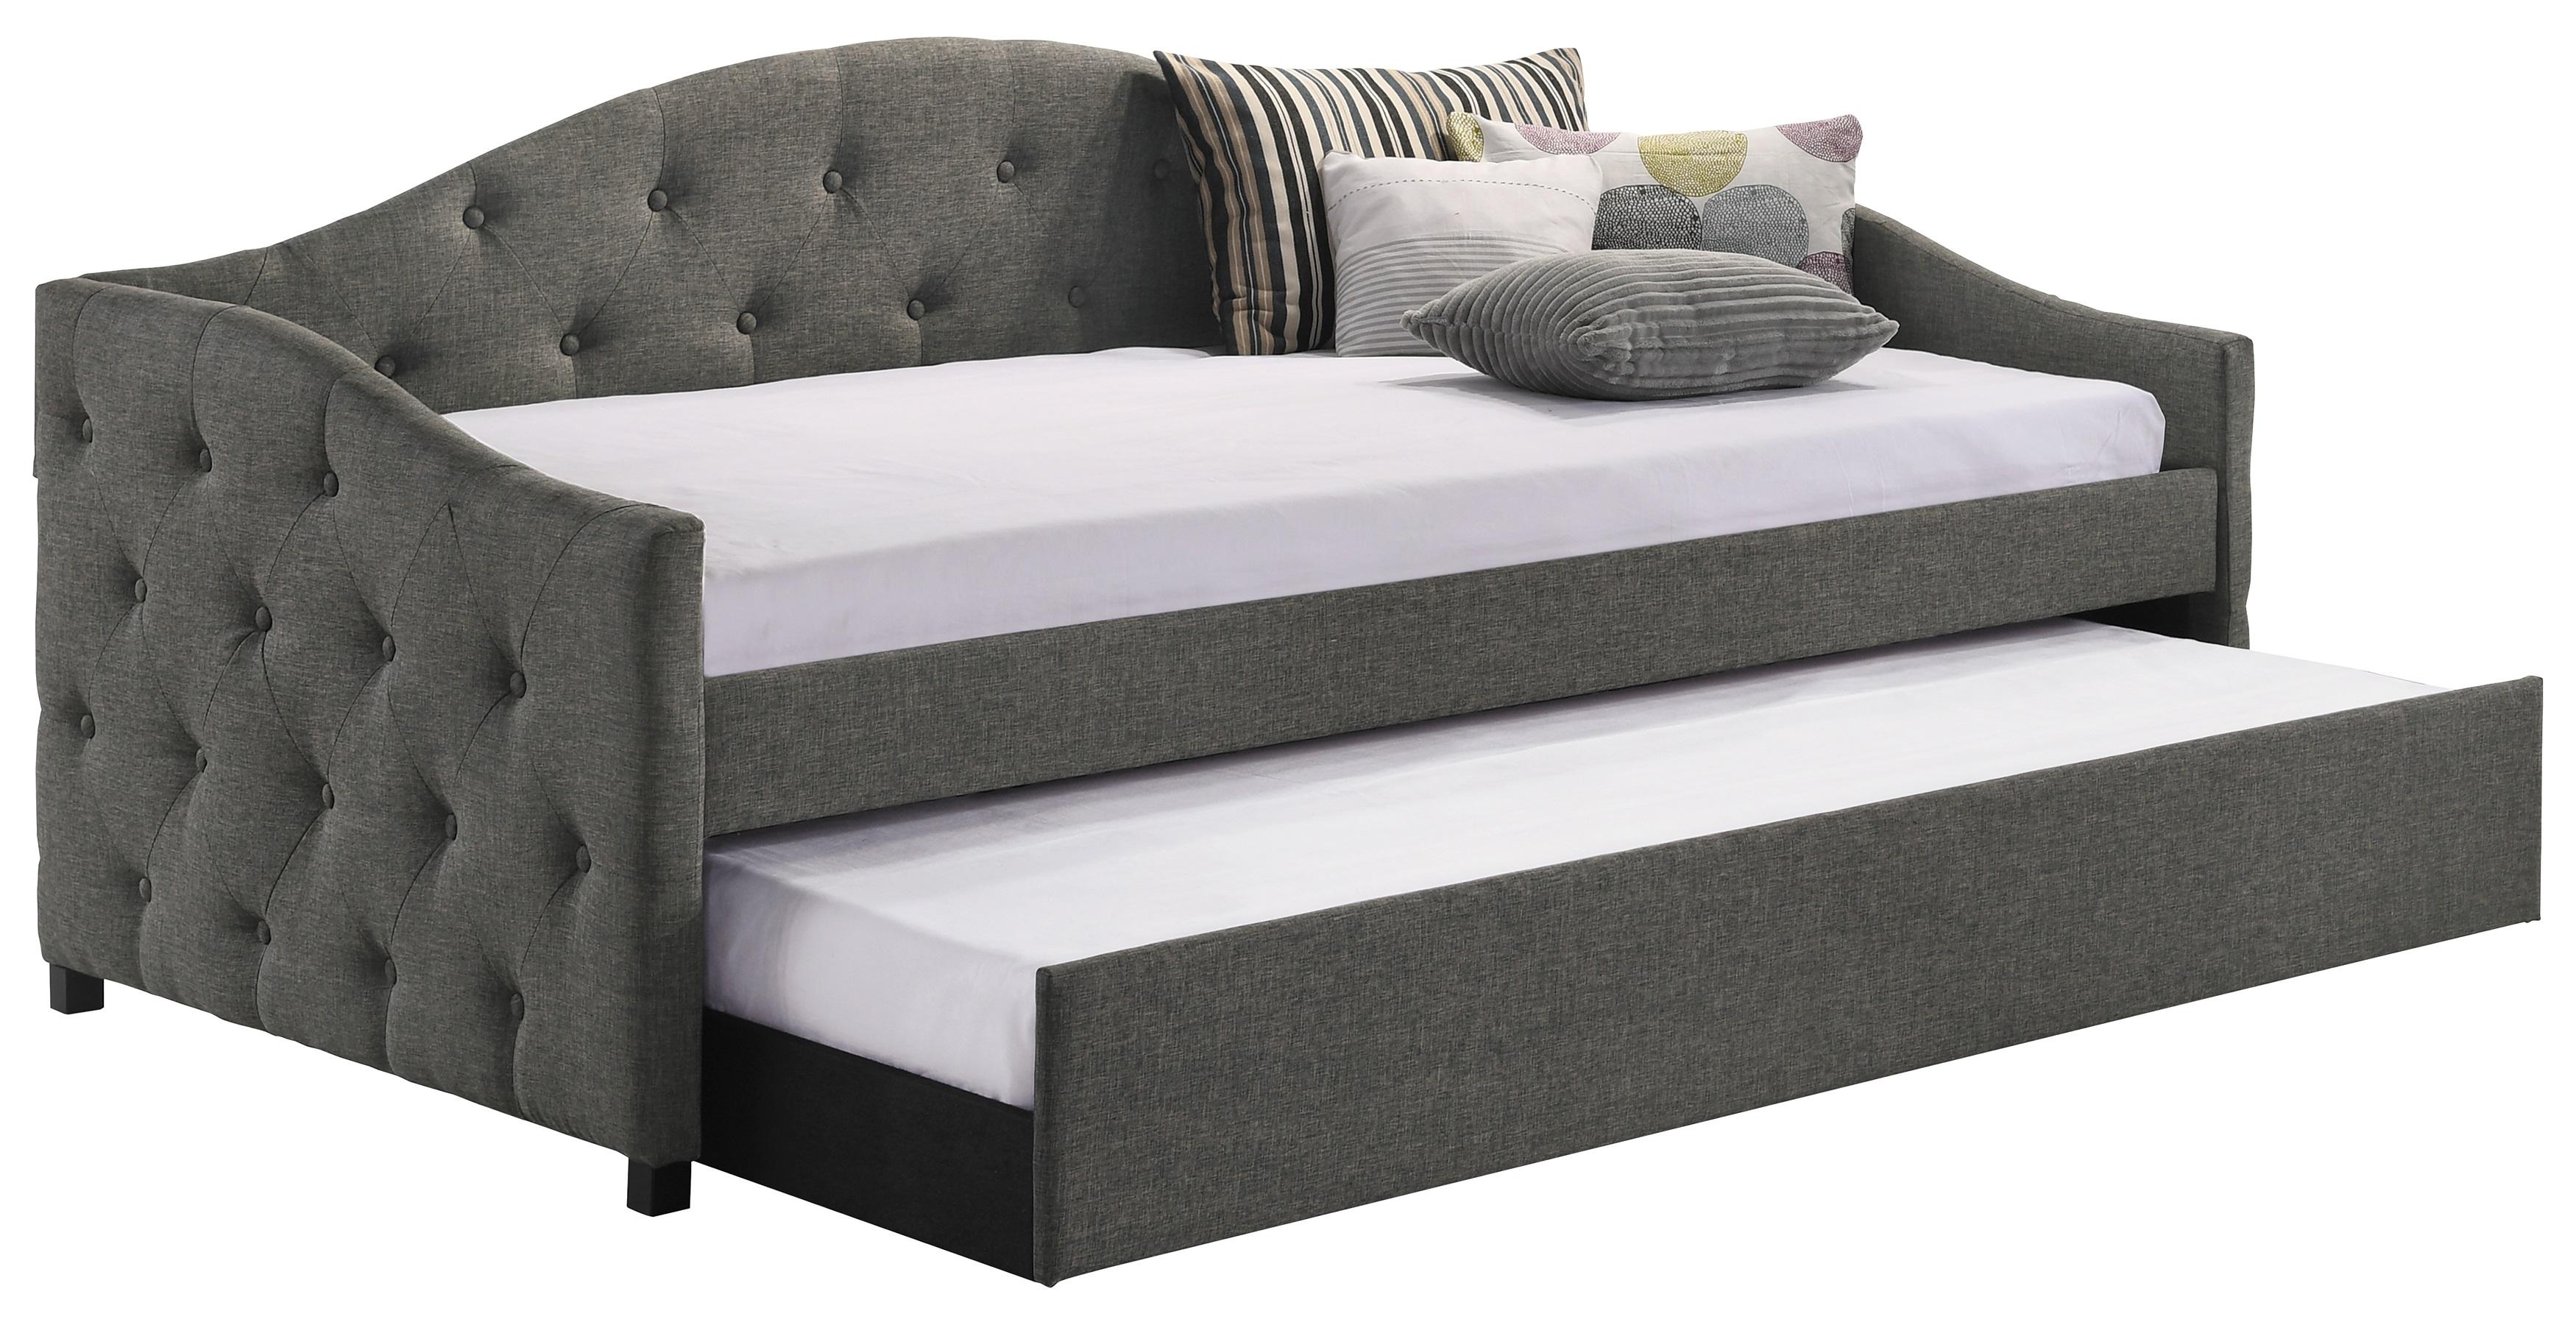 Transitional Daybed w/Trundle 300638 Sadie 300638 in Gray 